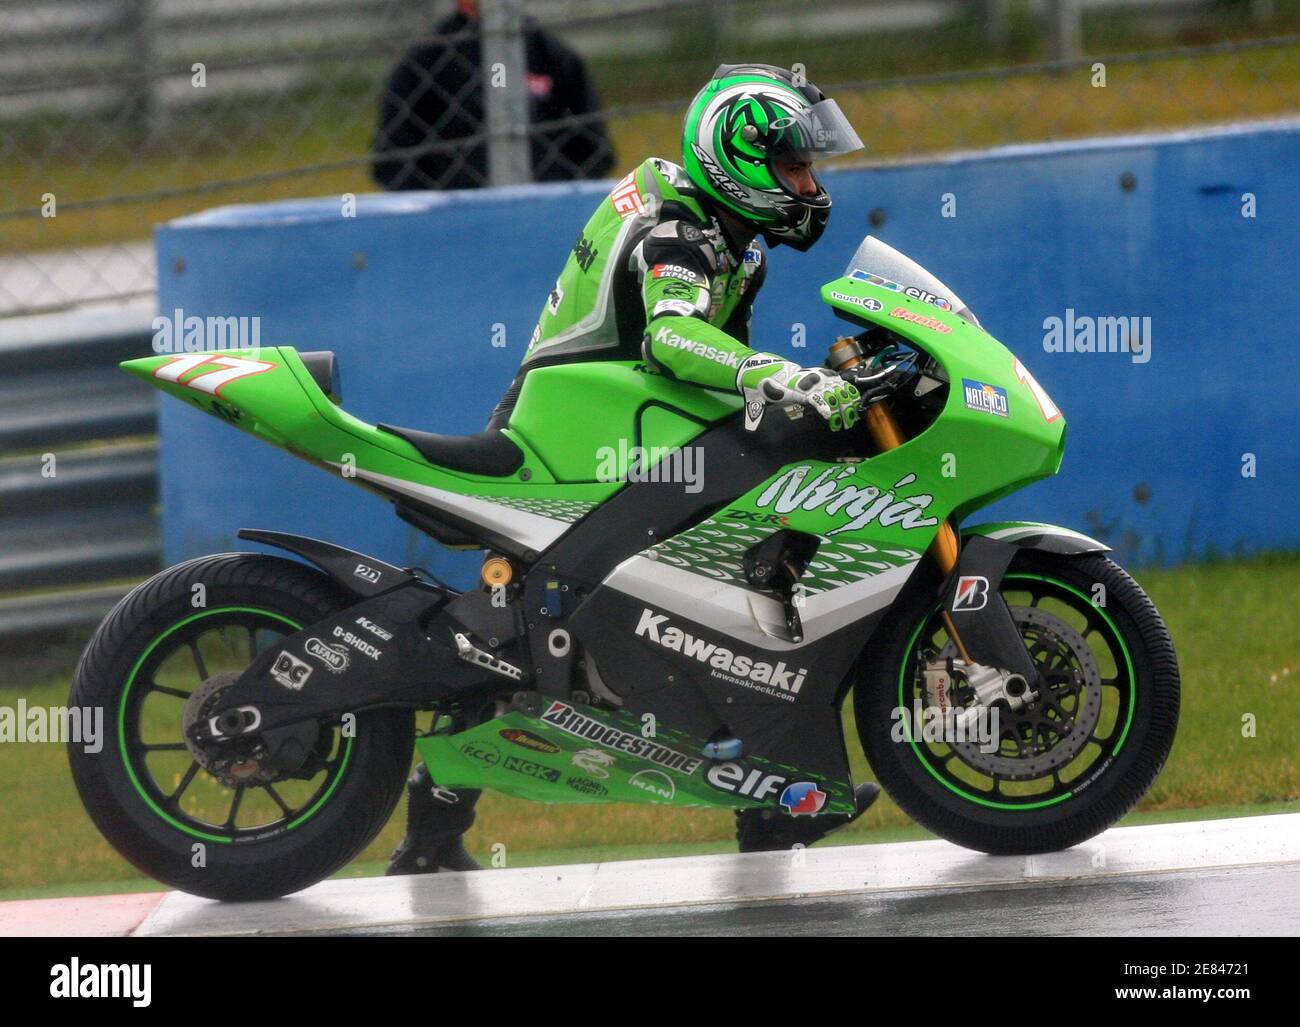 Kawasaki Racing Team MotoGP rider Randy De Puniet of France pushes his  motorcycle in the last lap of a qualifying session at Istanbul Park in  Istanbul April 29, 2006. Chris Vermeulen of